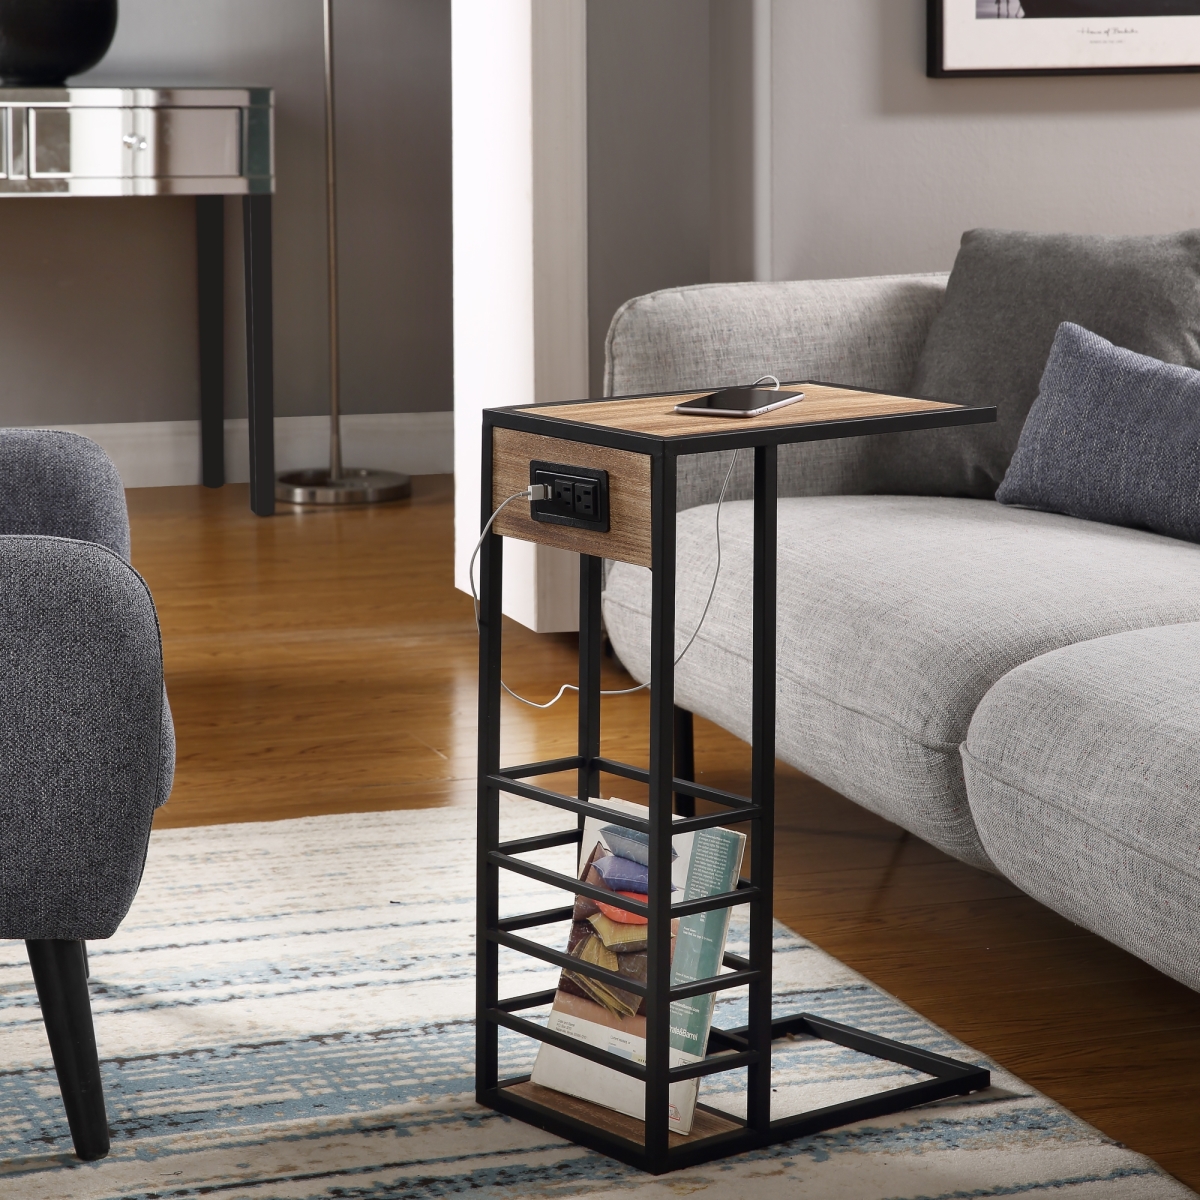 Let99-26bn-ue Posh Living Arian C Table, End Table, Side Table & Laptop Stand, Brown & Black